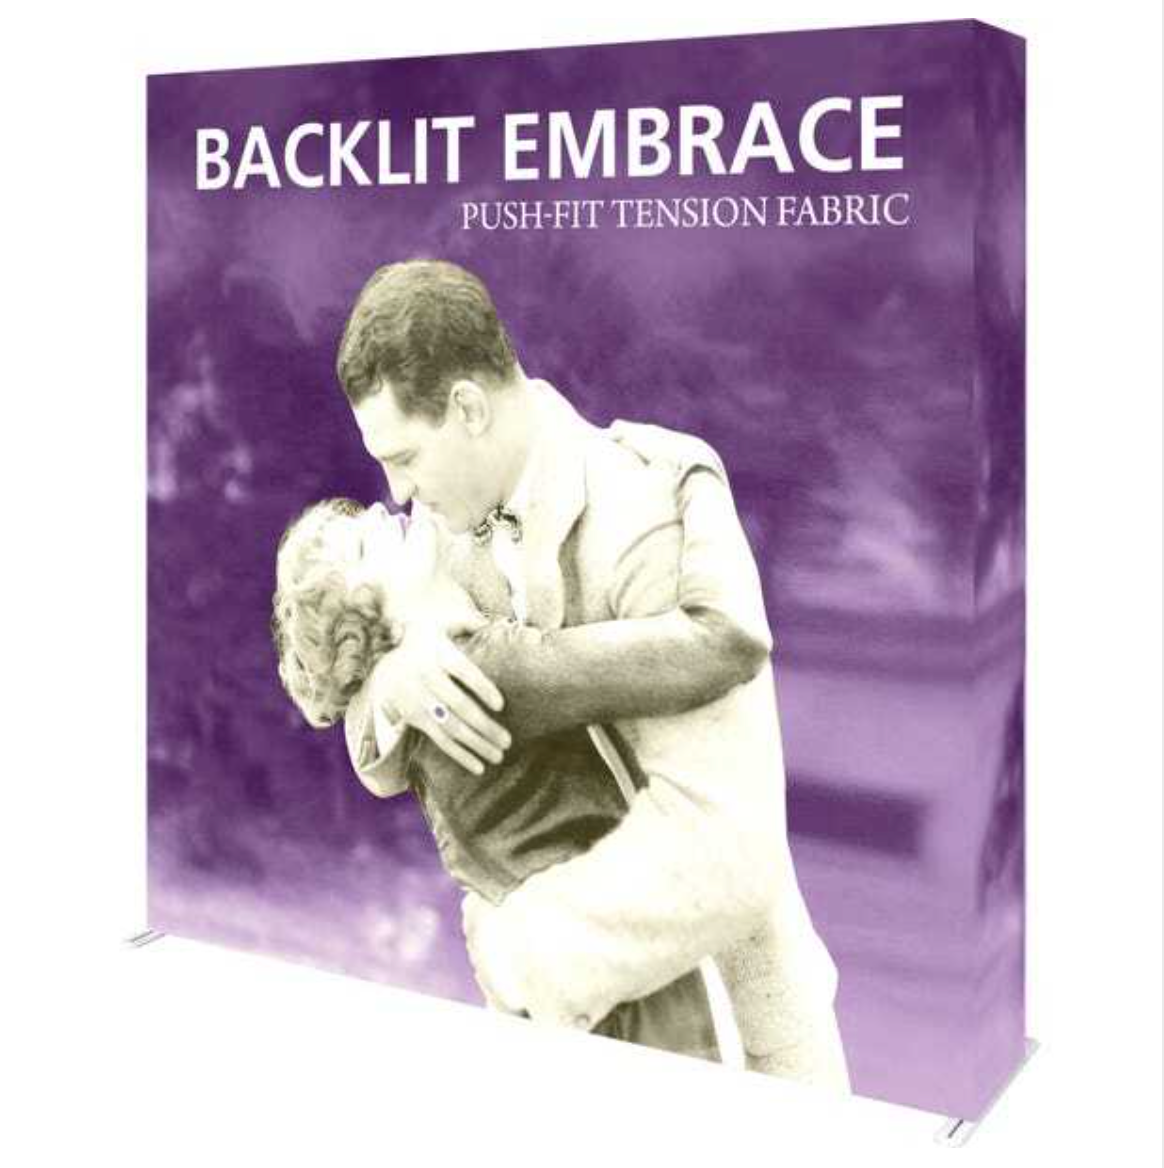 Backlit Embrace 7.5ft Tall Push-fit Tension Fabric Display